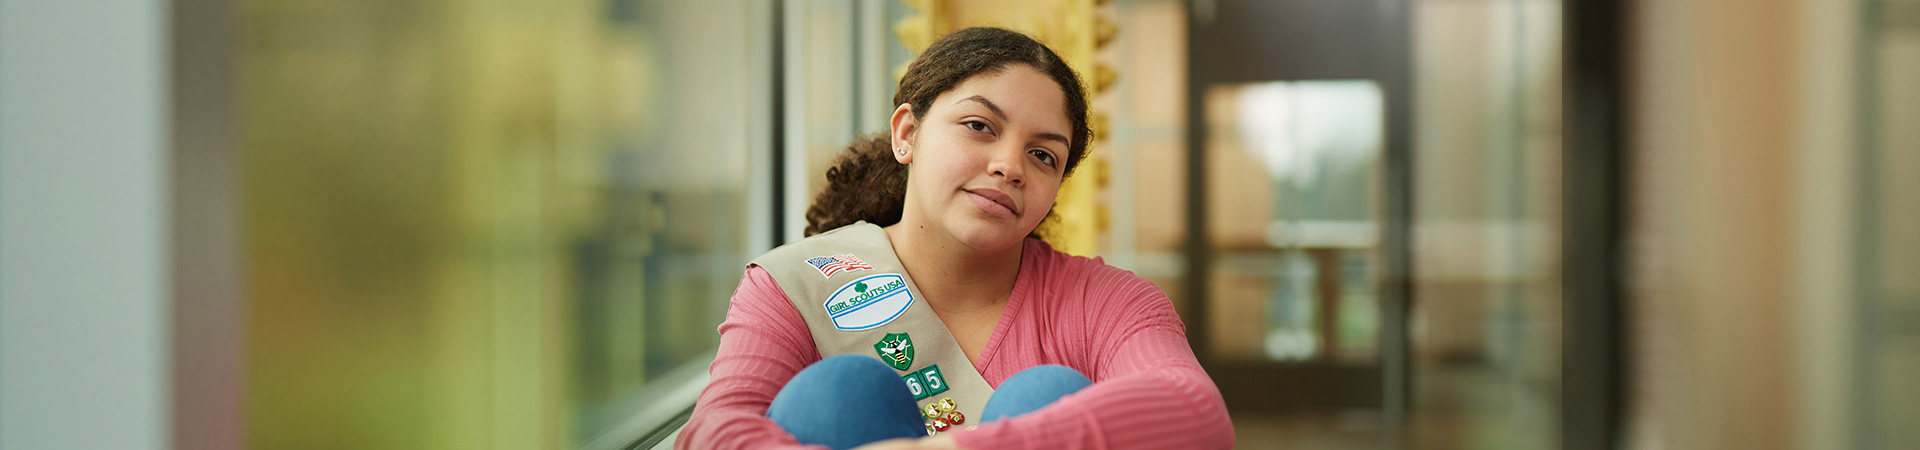  girl scout ambassador high school girl in school wearing sash with highest awards pins 